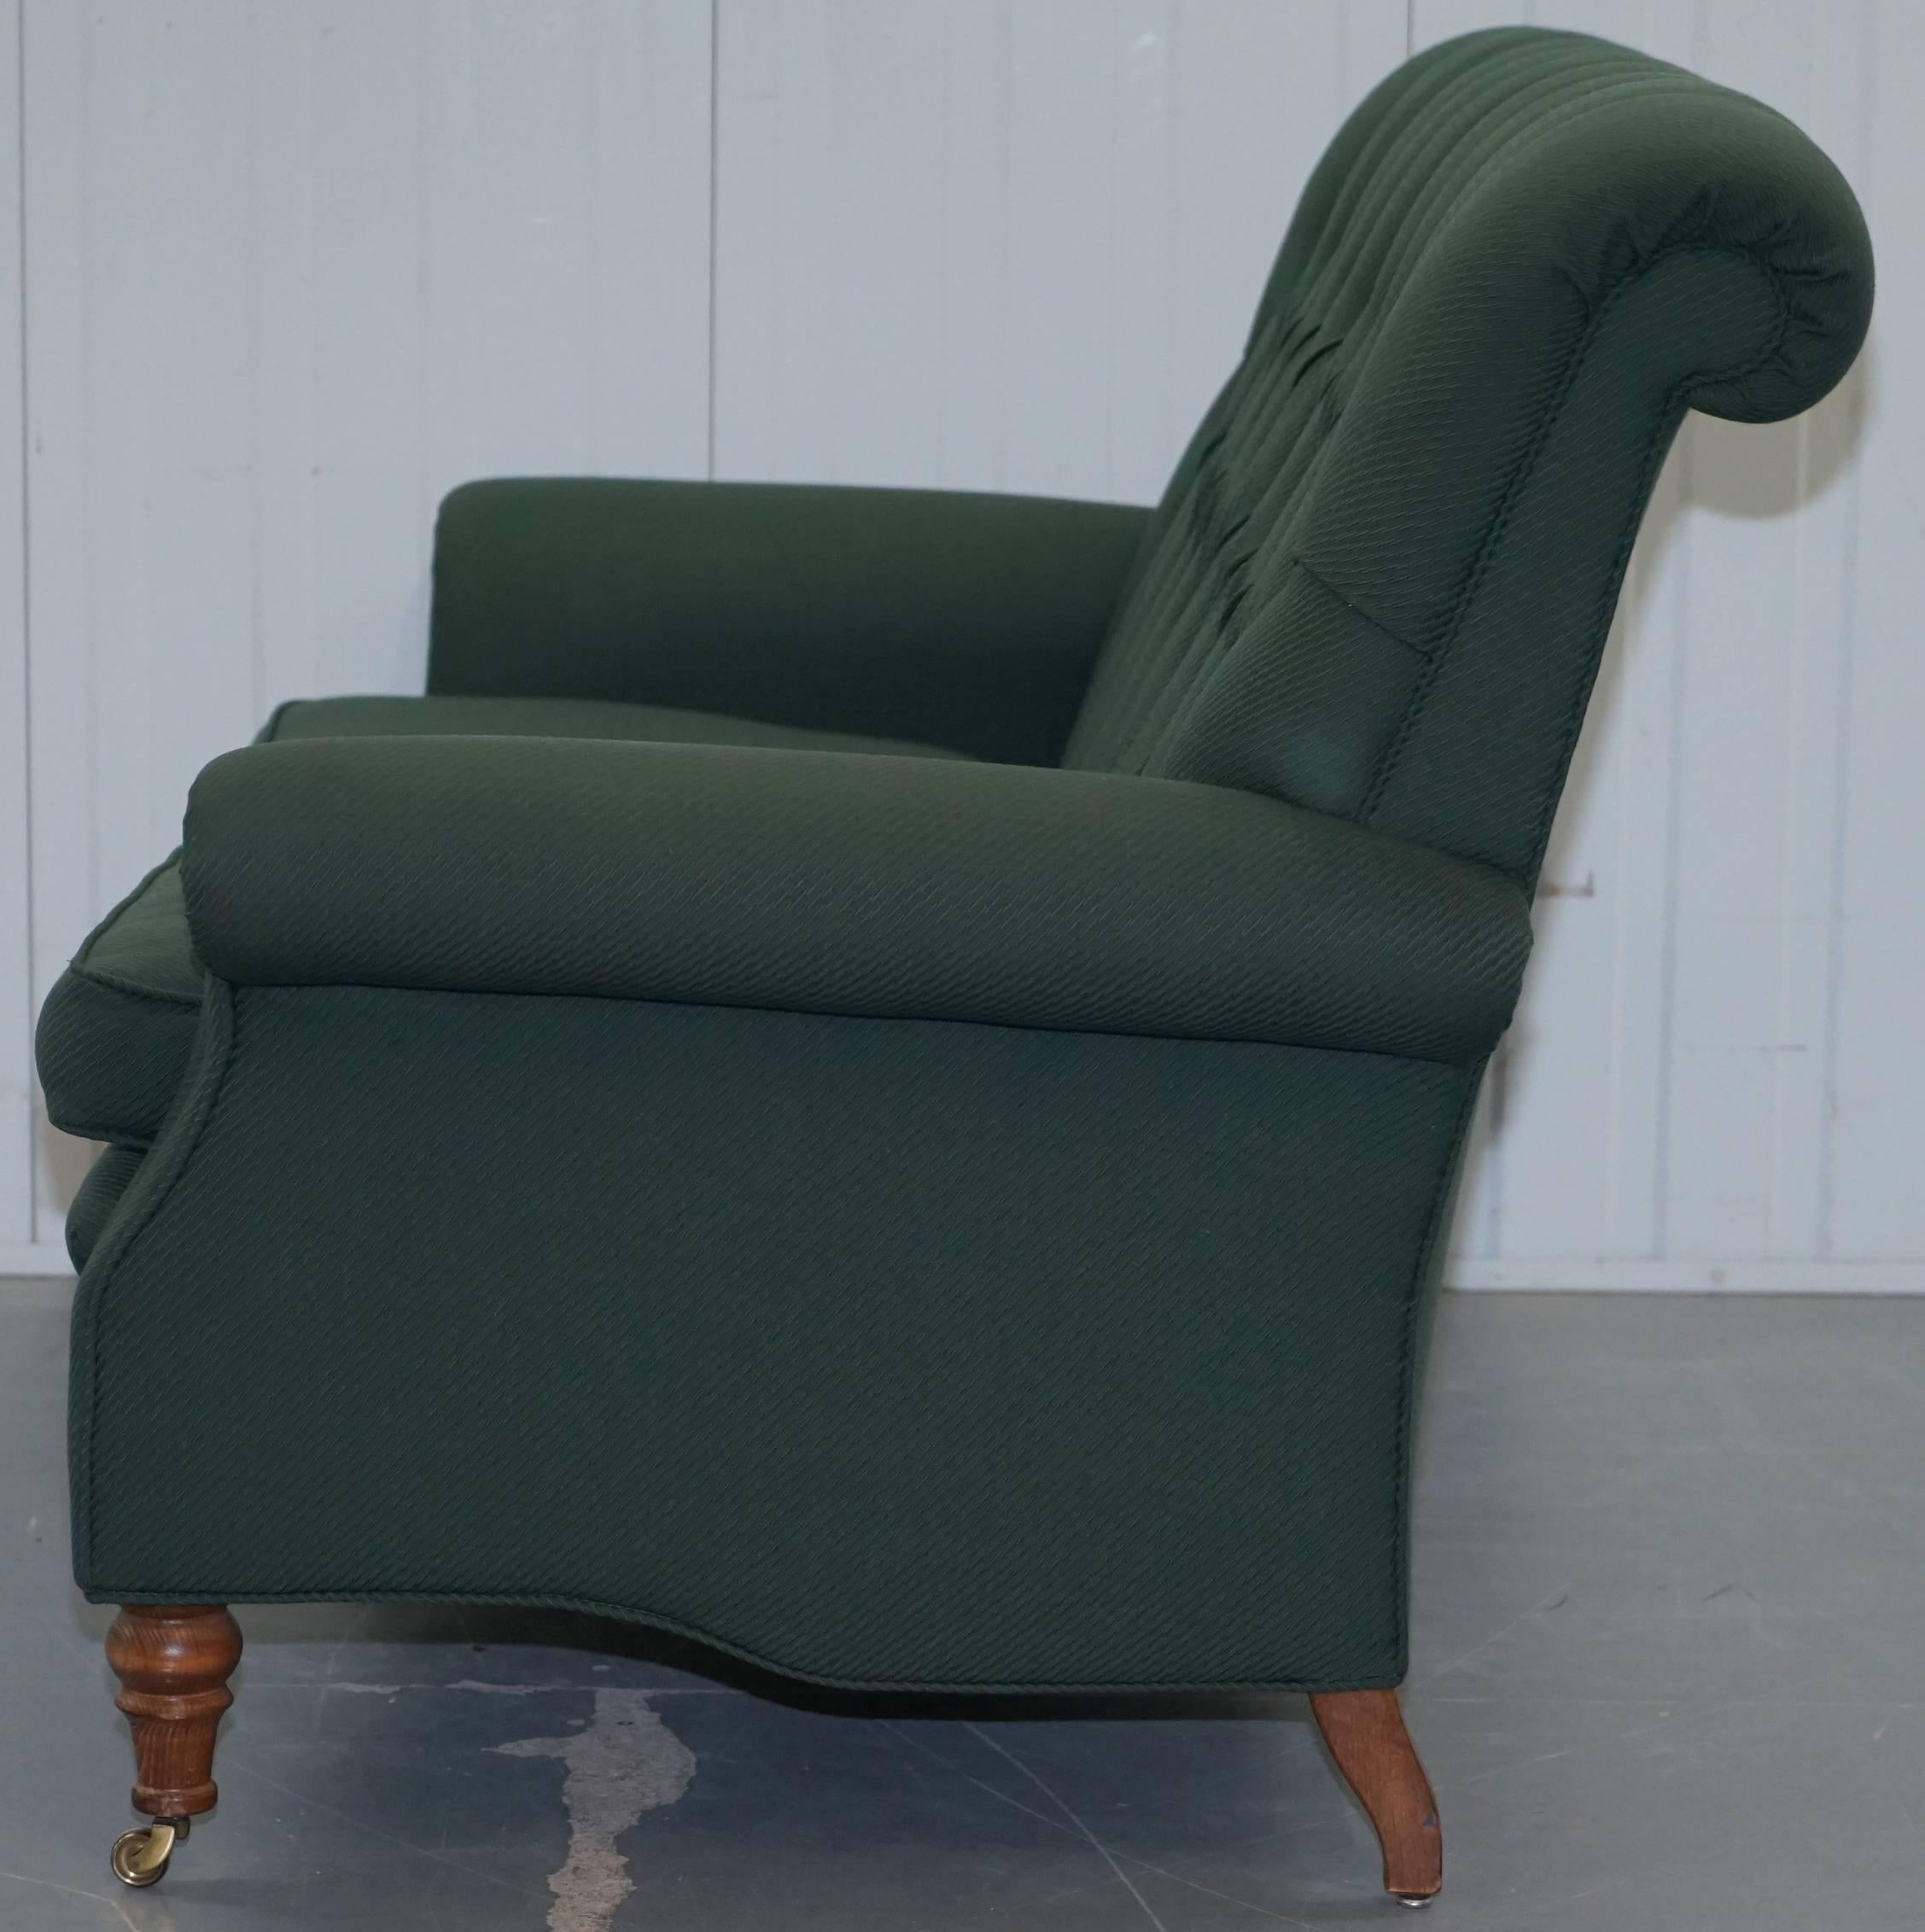 Wellington Model Howard Style Chesterfield Green Upholstery Two-Seat Bench Sofa 10